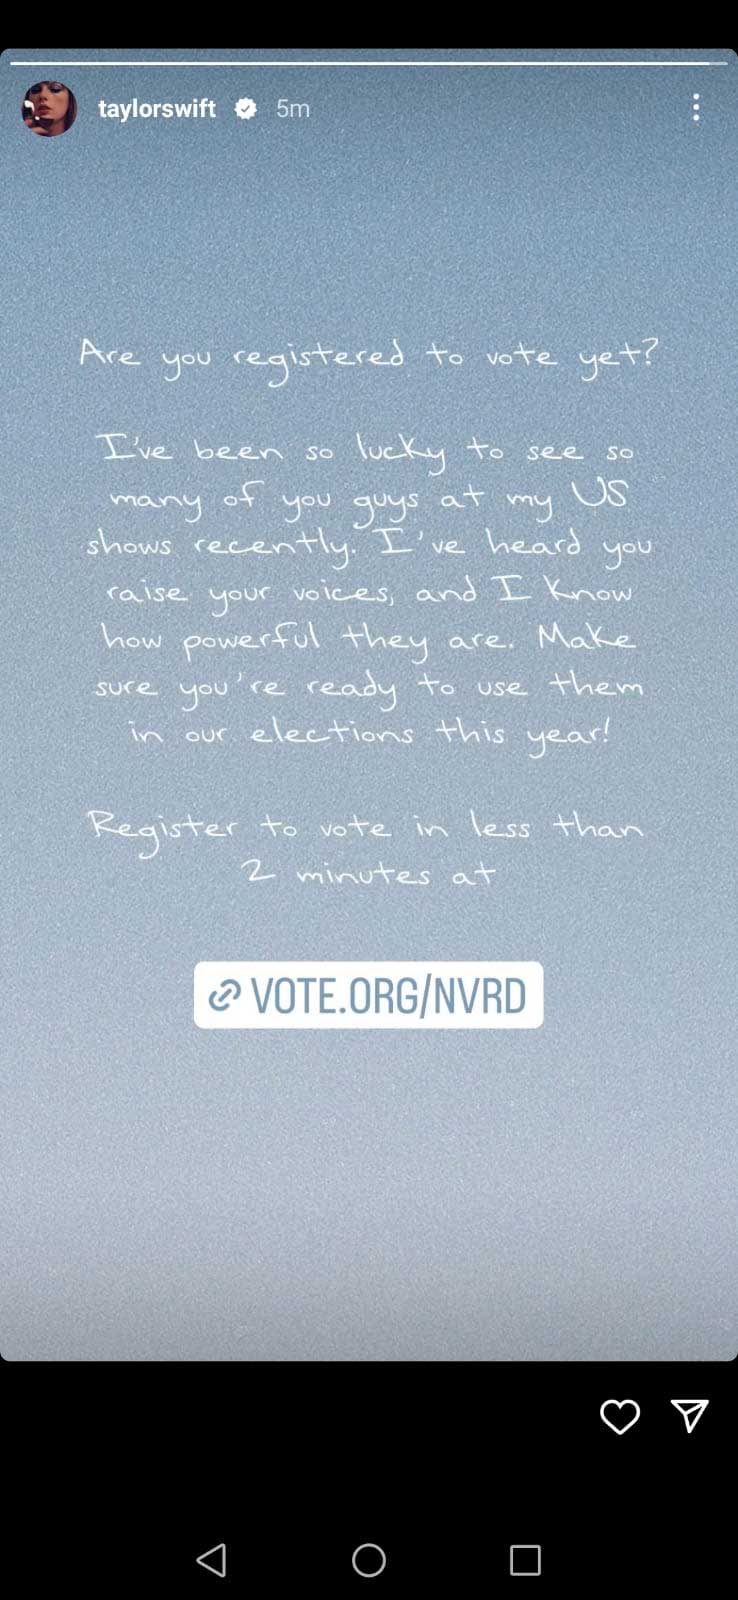 Taylor Swift urges fans to register their votes ahead of US elections 2024